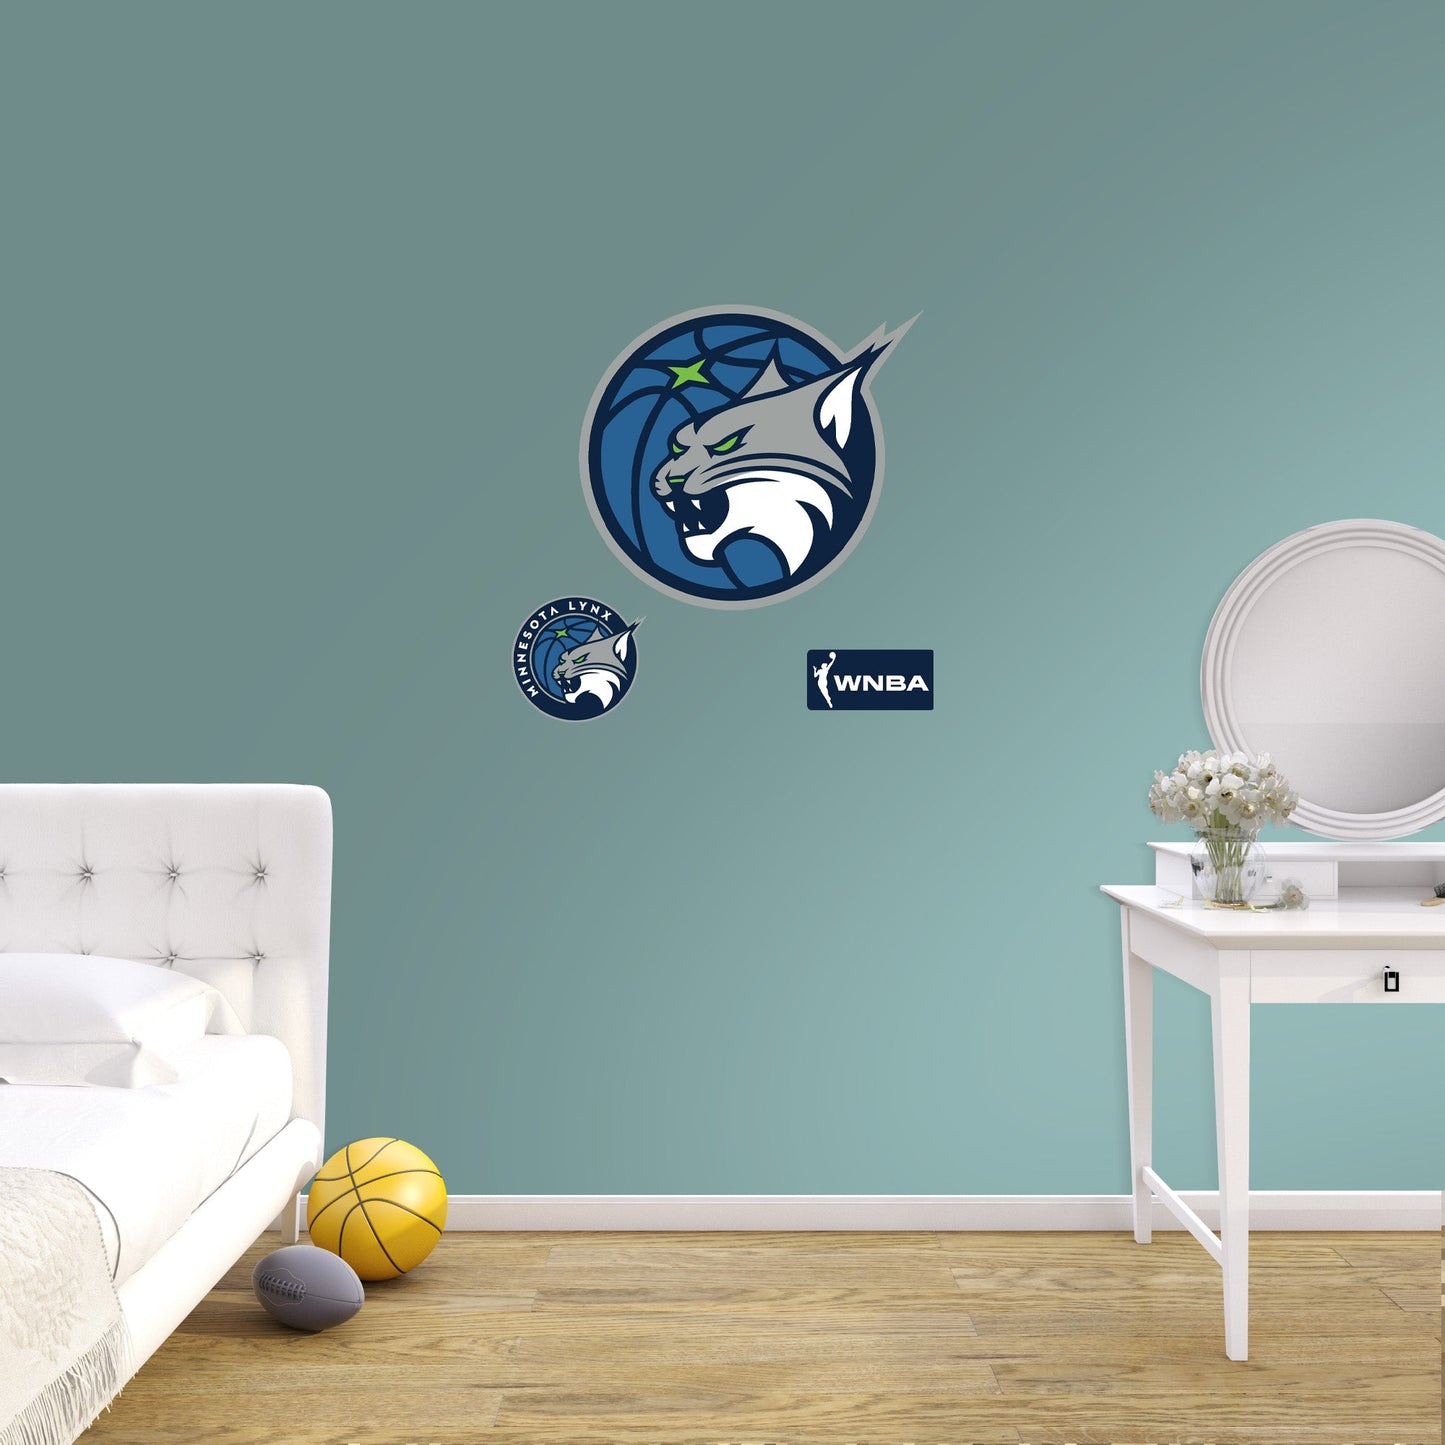 Minnesota Lynx:   Logo        - Officially Licensed WNBA Removable     Adhesive Decal